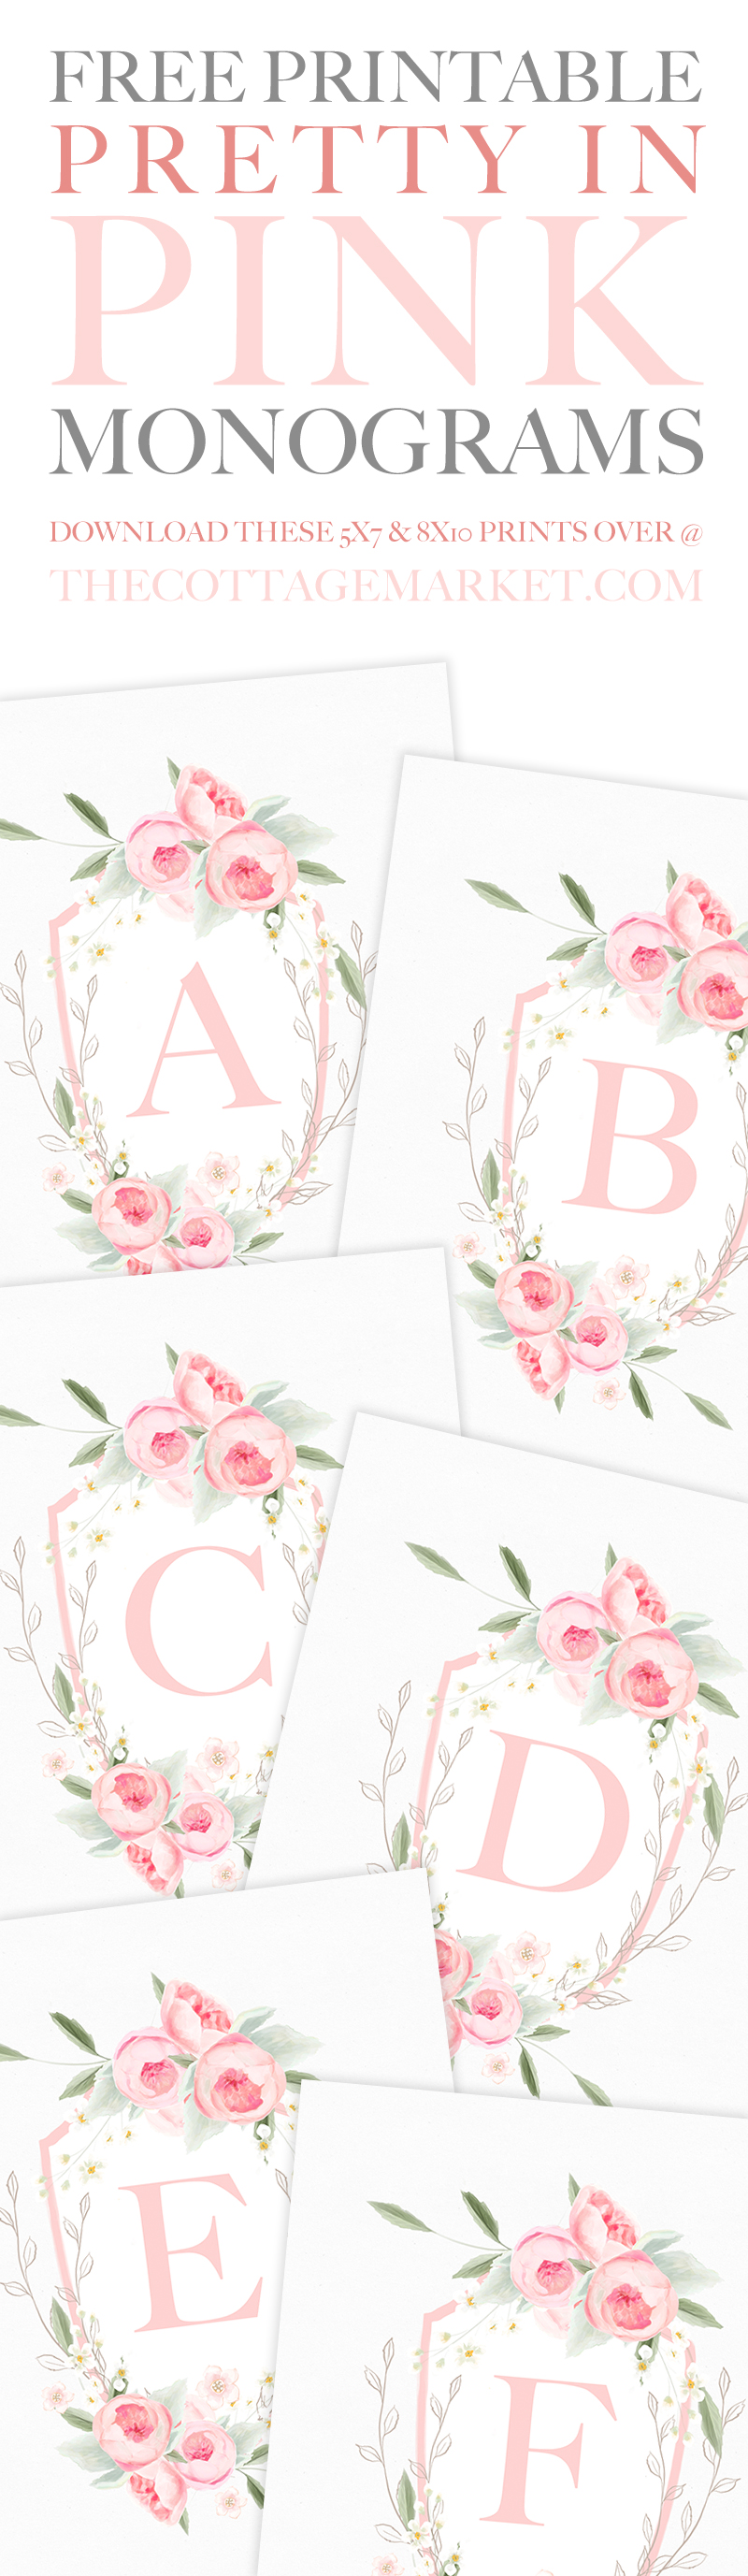 Pretty in Pink Free Printable Monograms are just waiting for you to print them out and create beautiful creations with them. From Banners to Cards... enjoy!